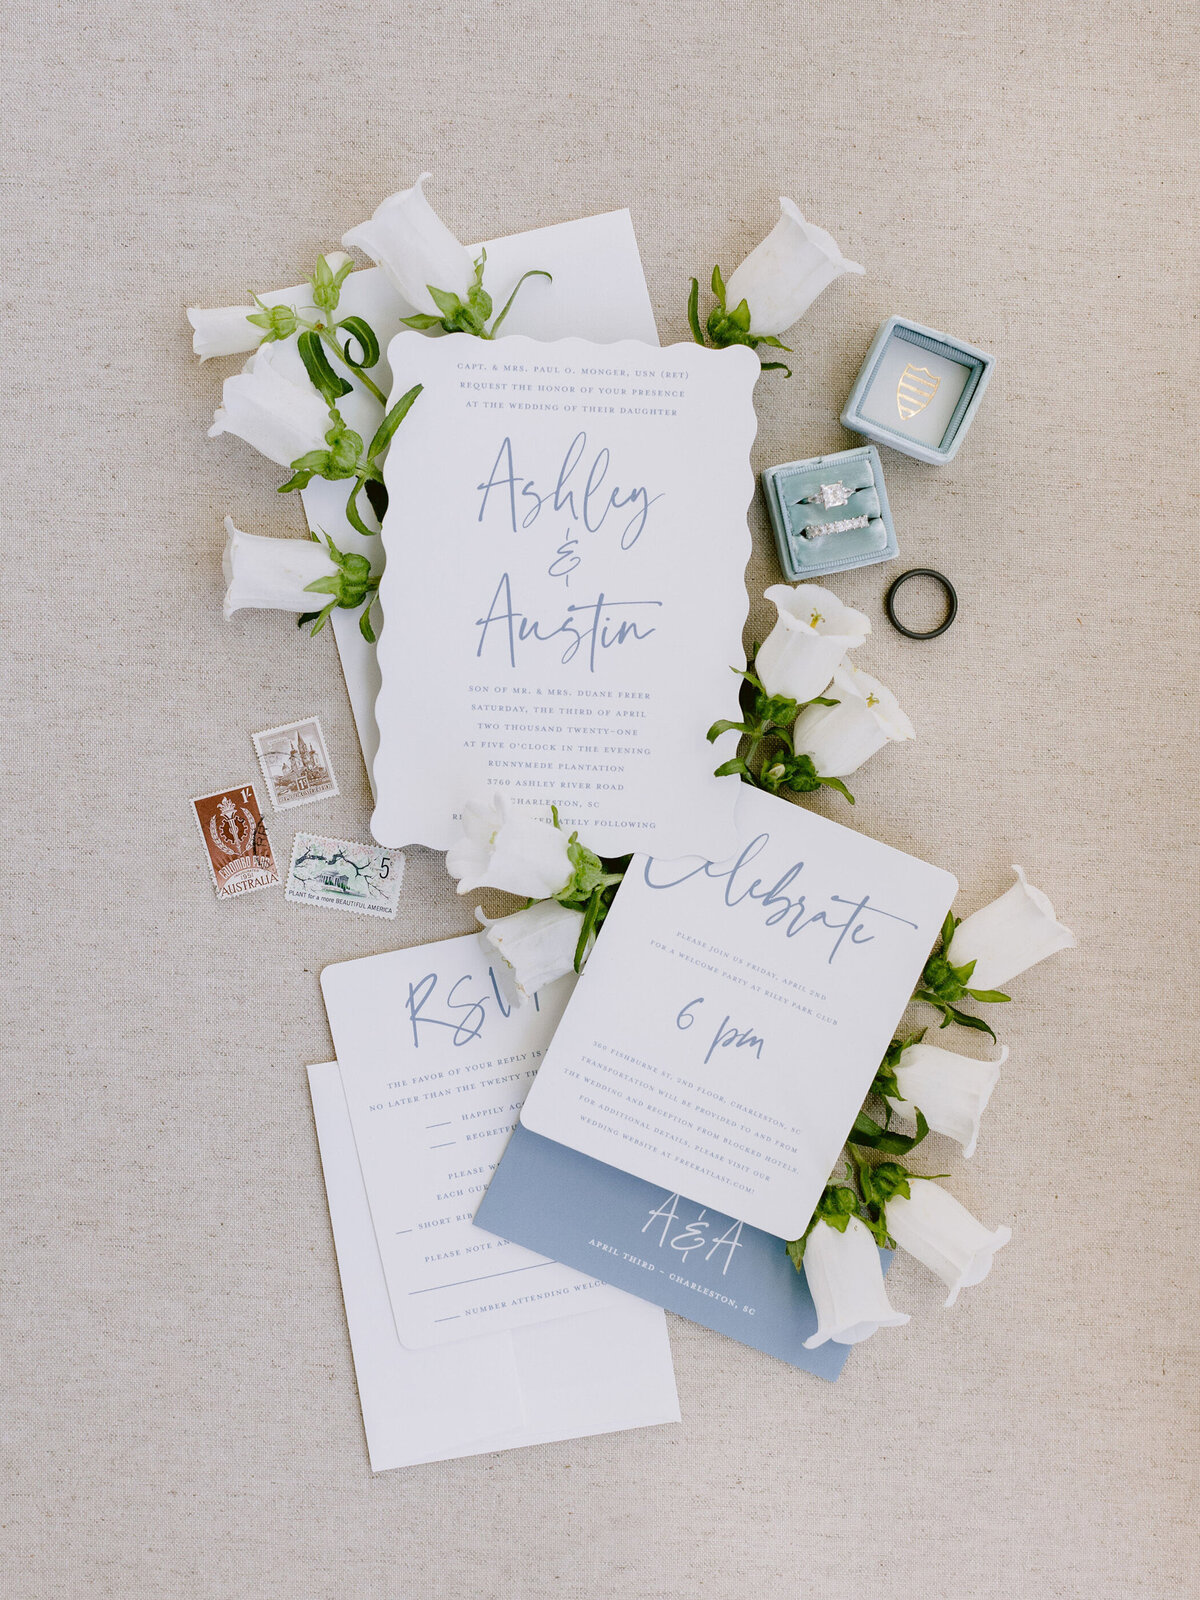 Ashley + Austin | Wedding at Runnymede by Pure Luxe Bride: Charleston Wedding and Event Planners